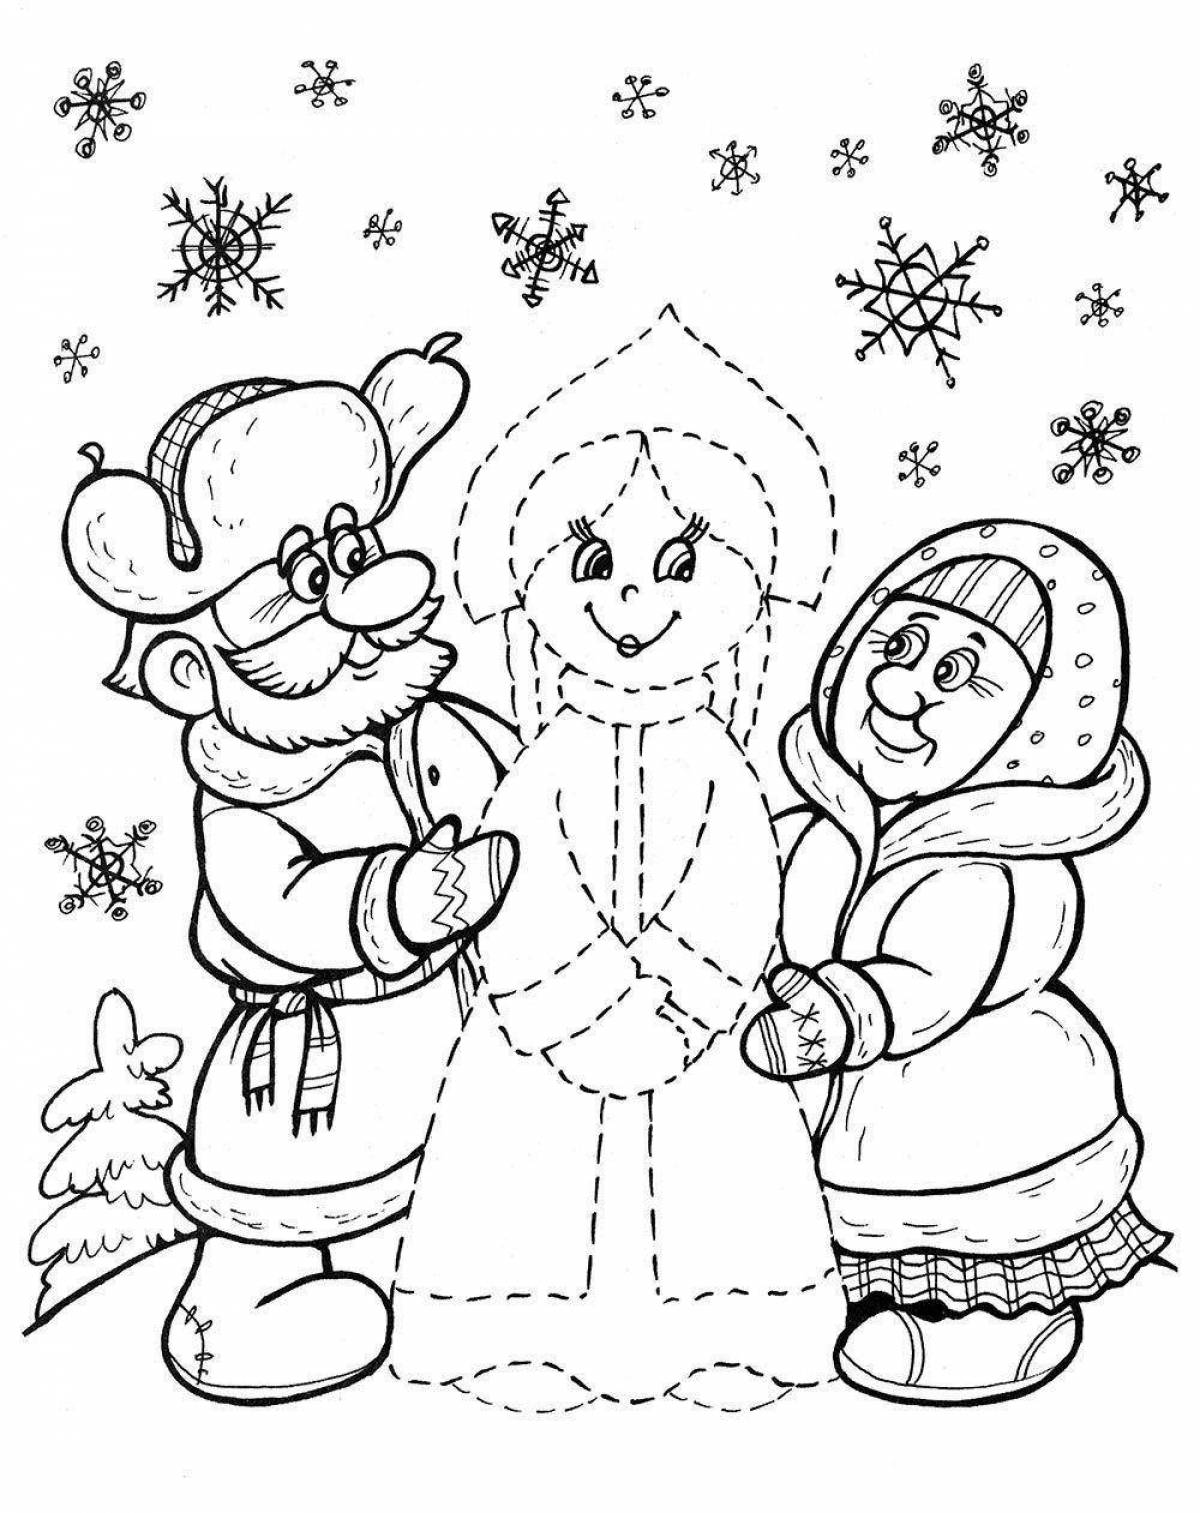 Coloring quirky snow maiden